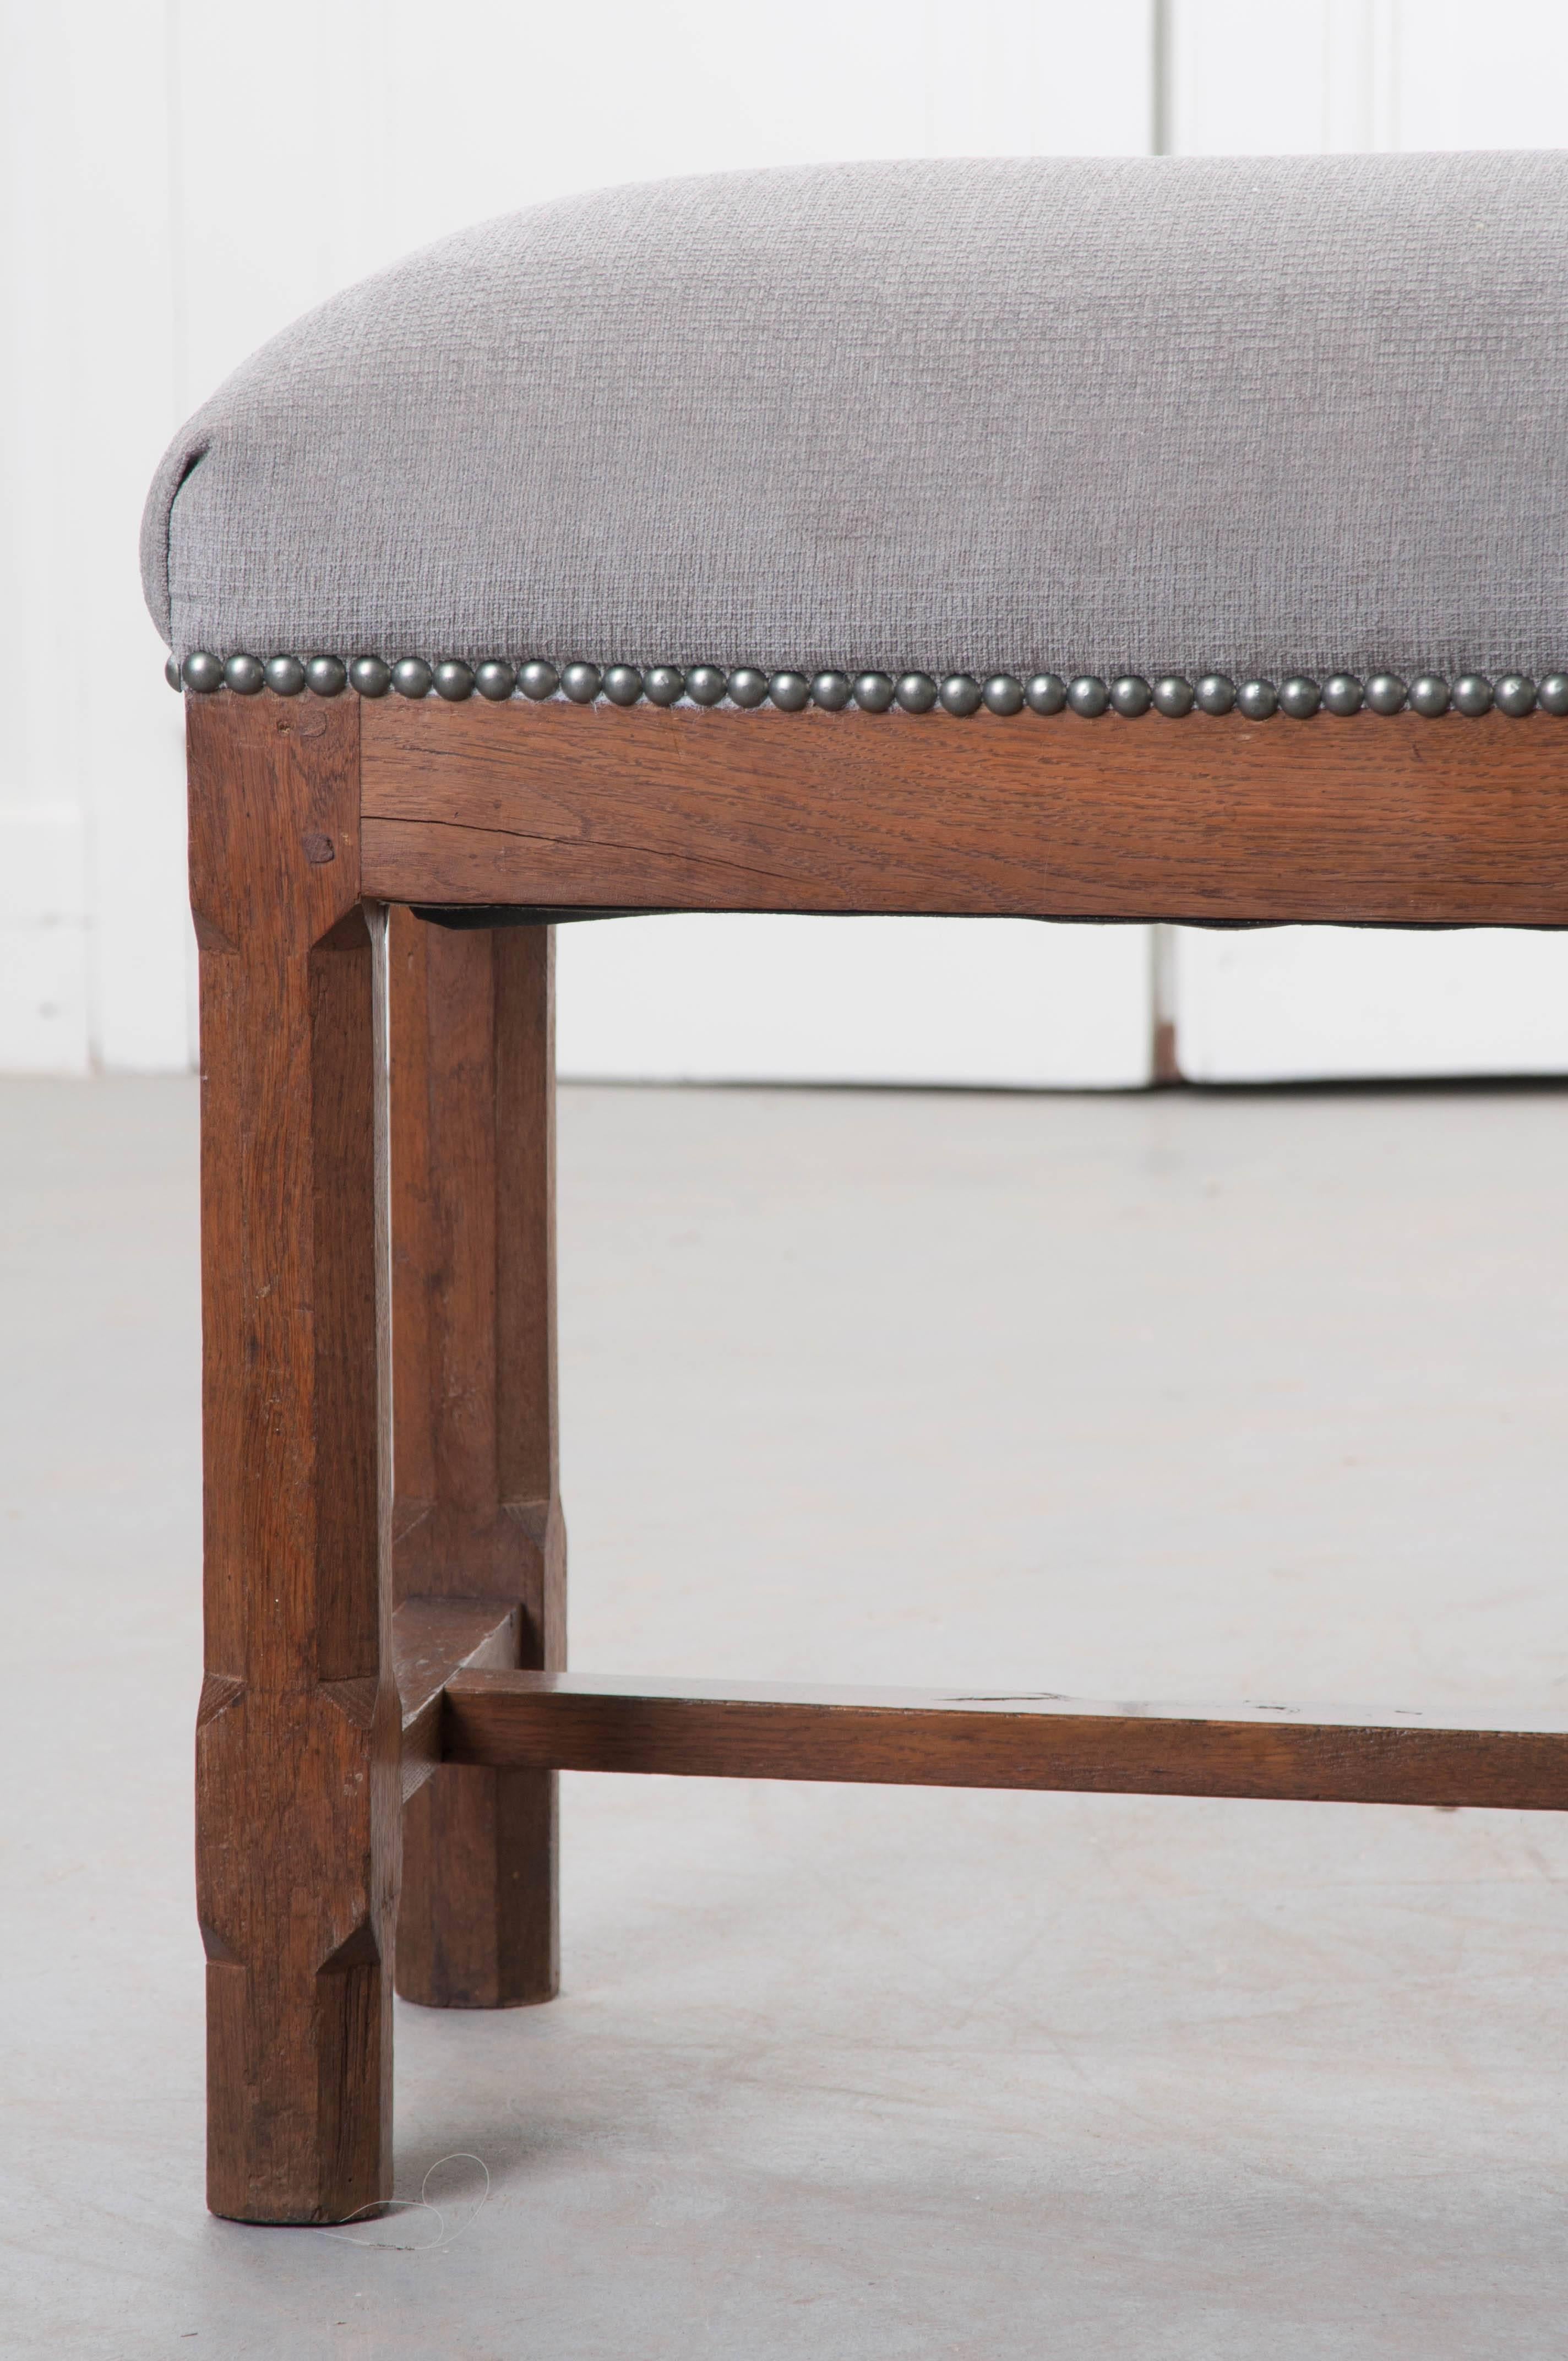 A newly upholstered antique French bench from the 19th century. The Provincial bench is made of solid oak that has been fixed together using peg and hole joinery. The chamfered legs are joined by an I-stretcher below. The recent grey upholstery is